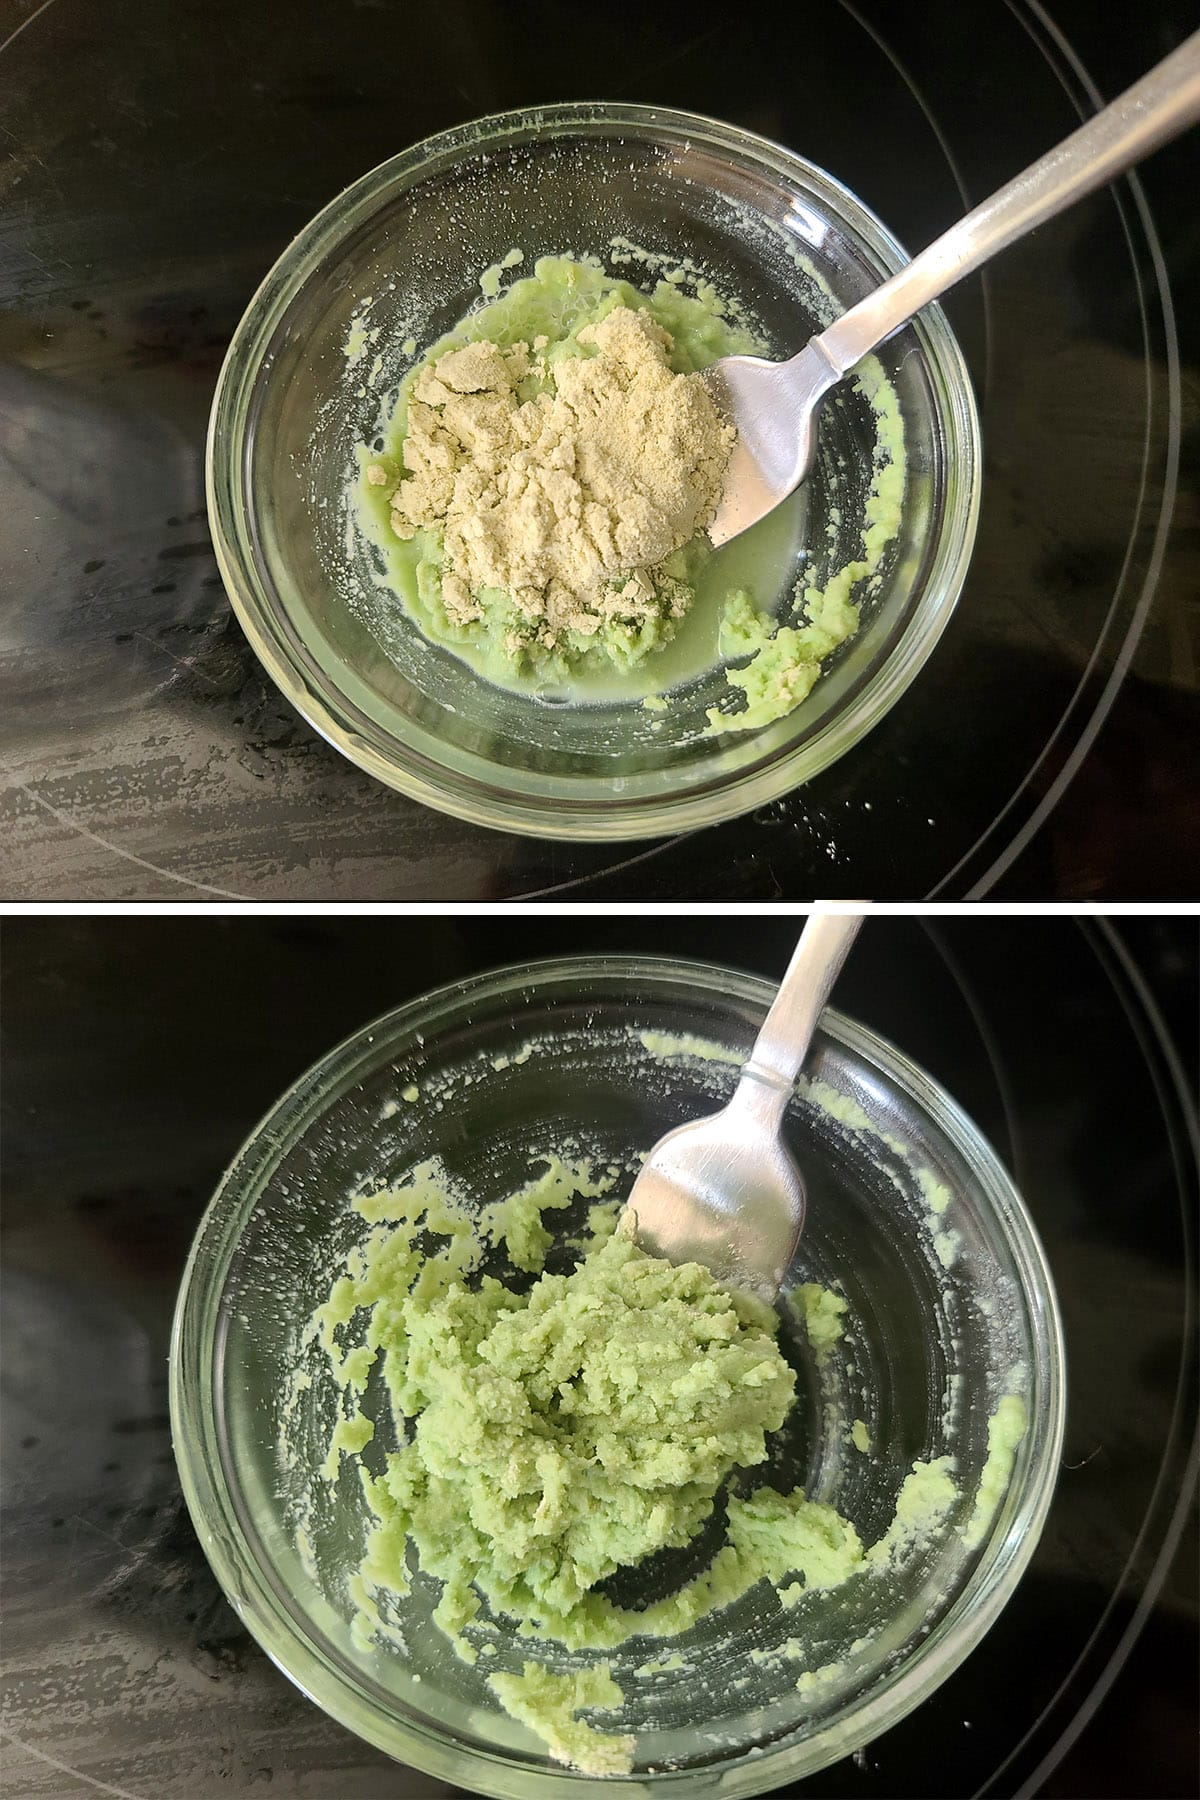 A two part image showing water being mixed with wasabi powder to form a thick paste